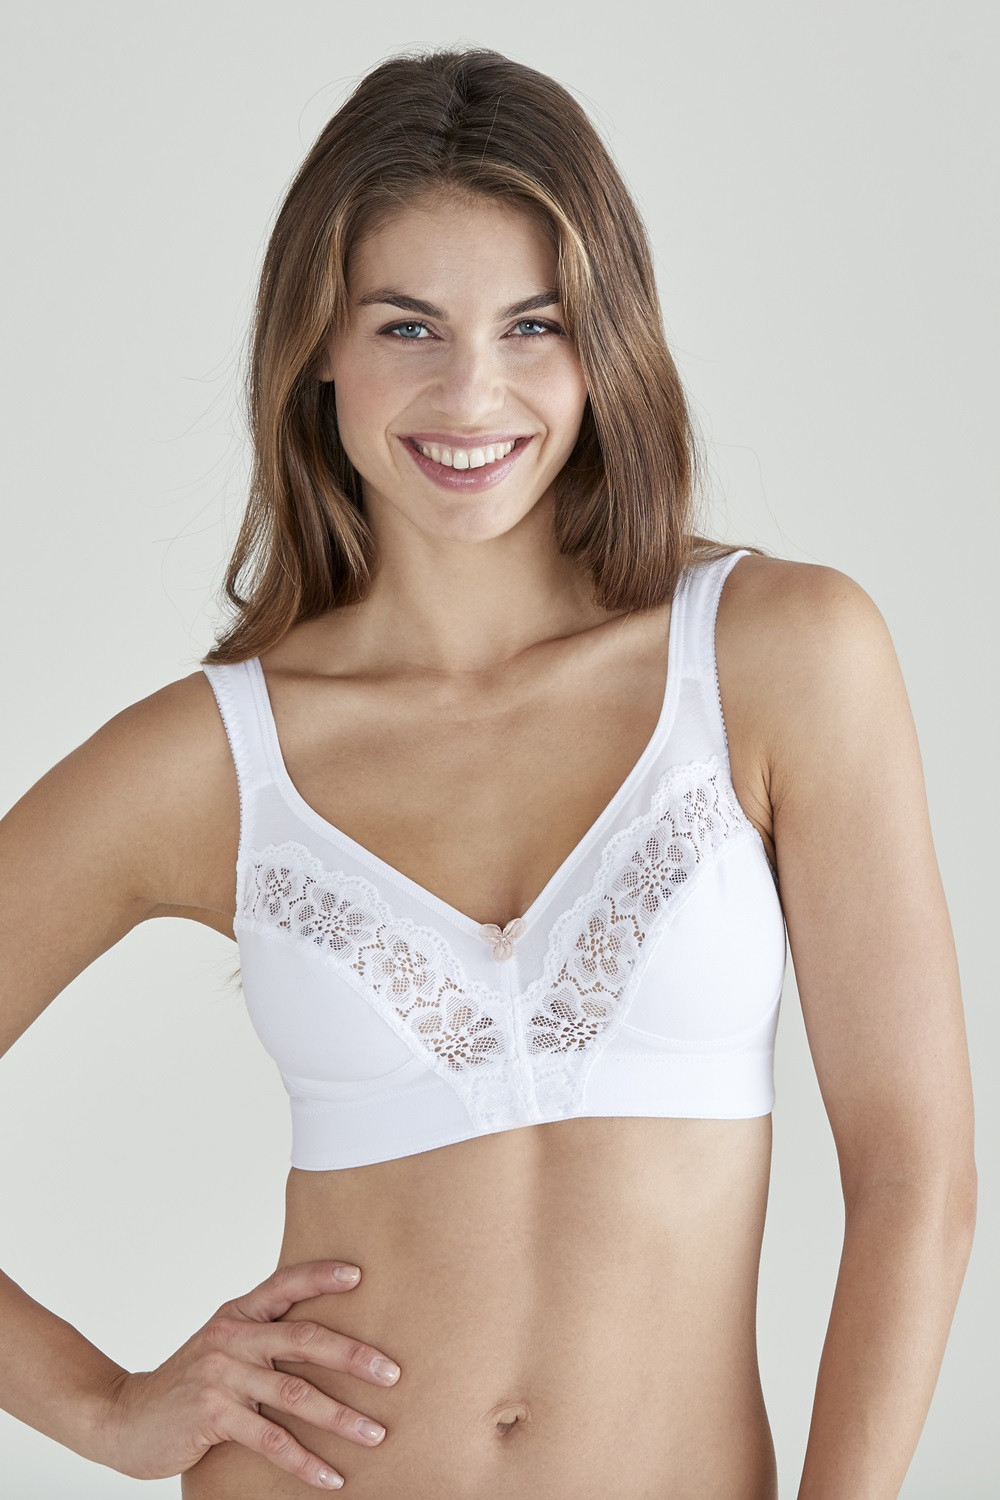 Faithful soft non-wired bra with lace